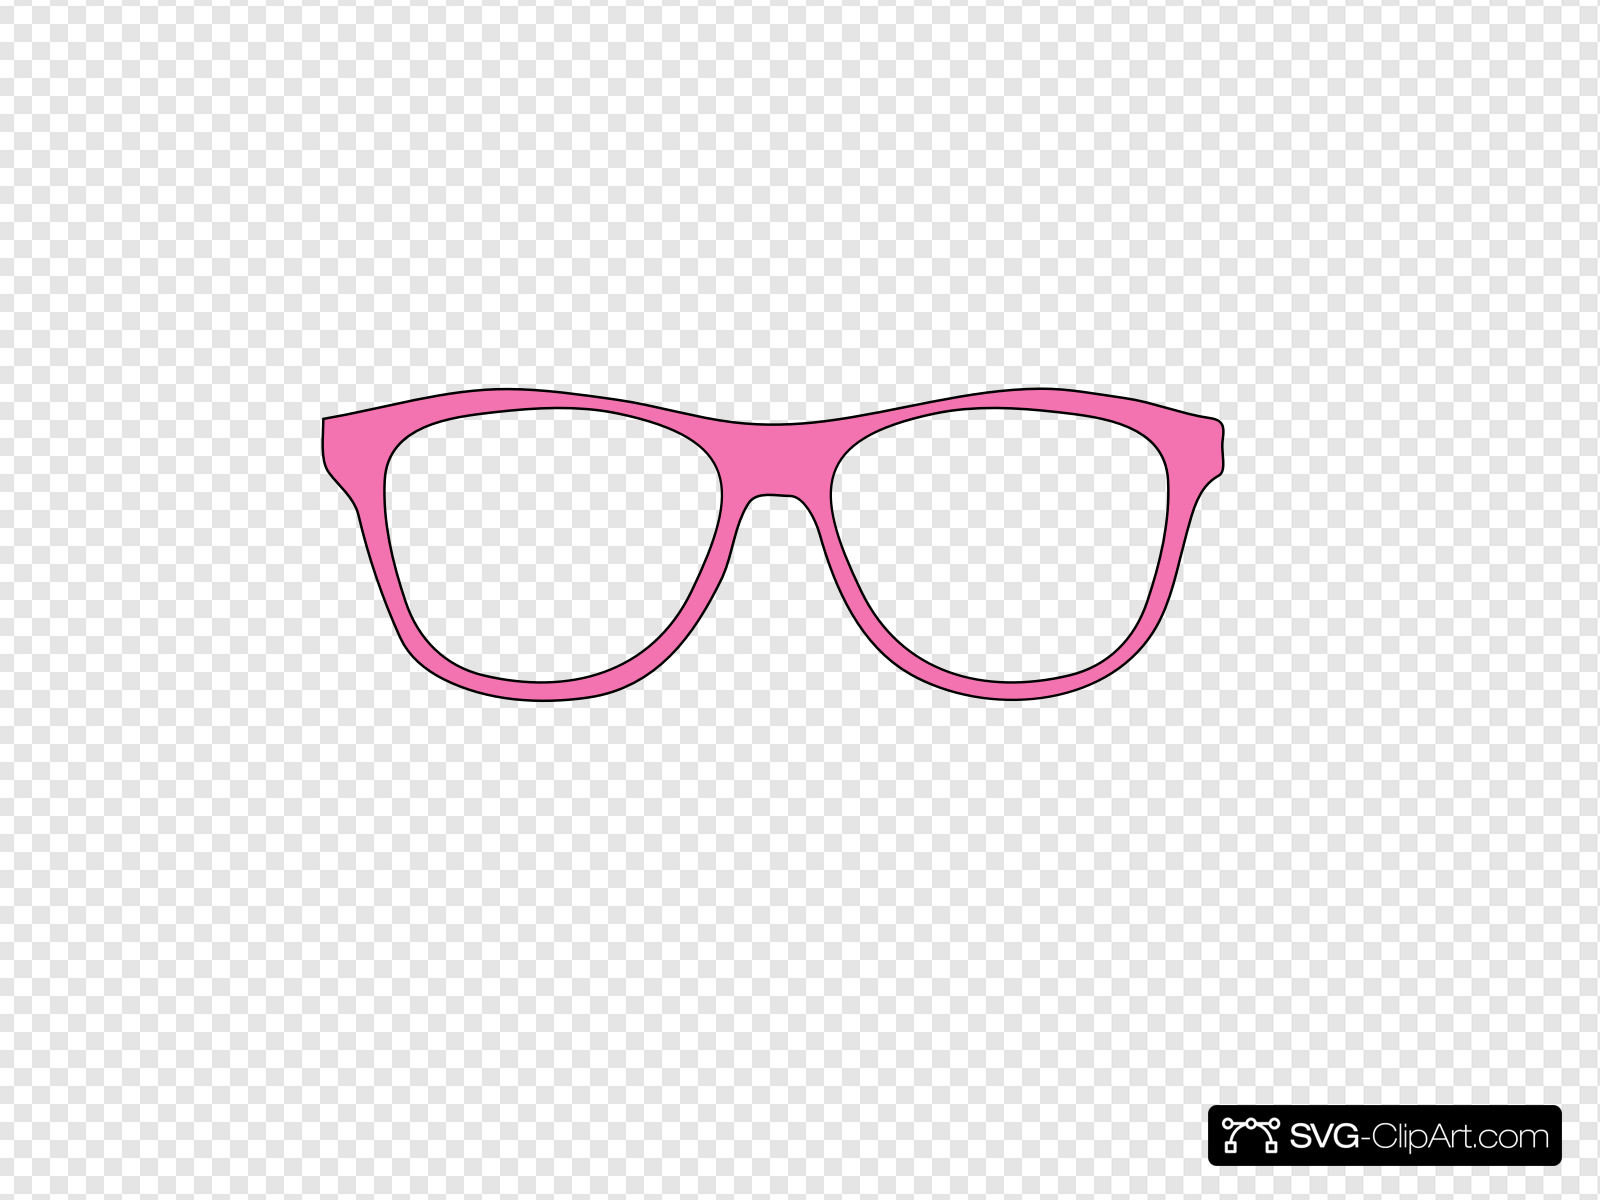 Pink Glasses Clip art, Icon and SVG